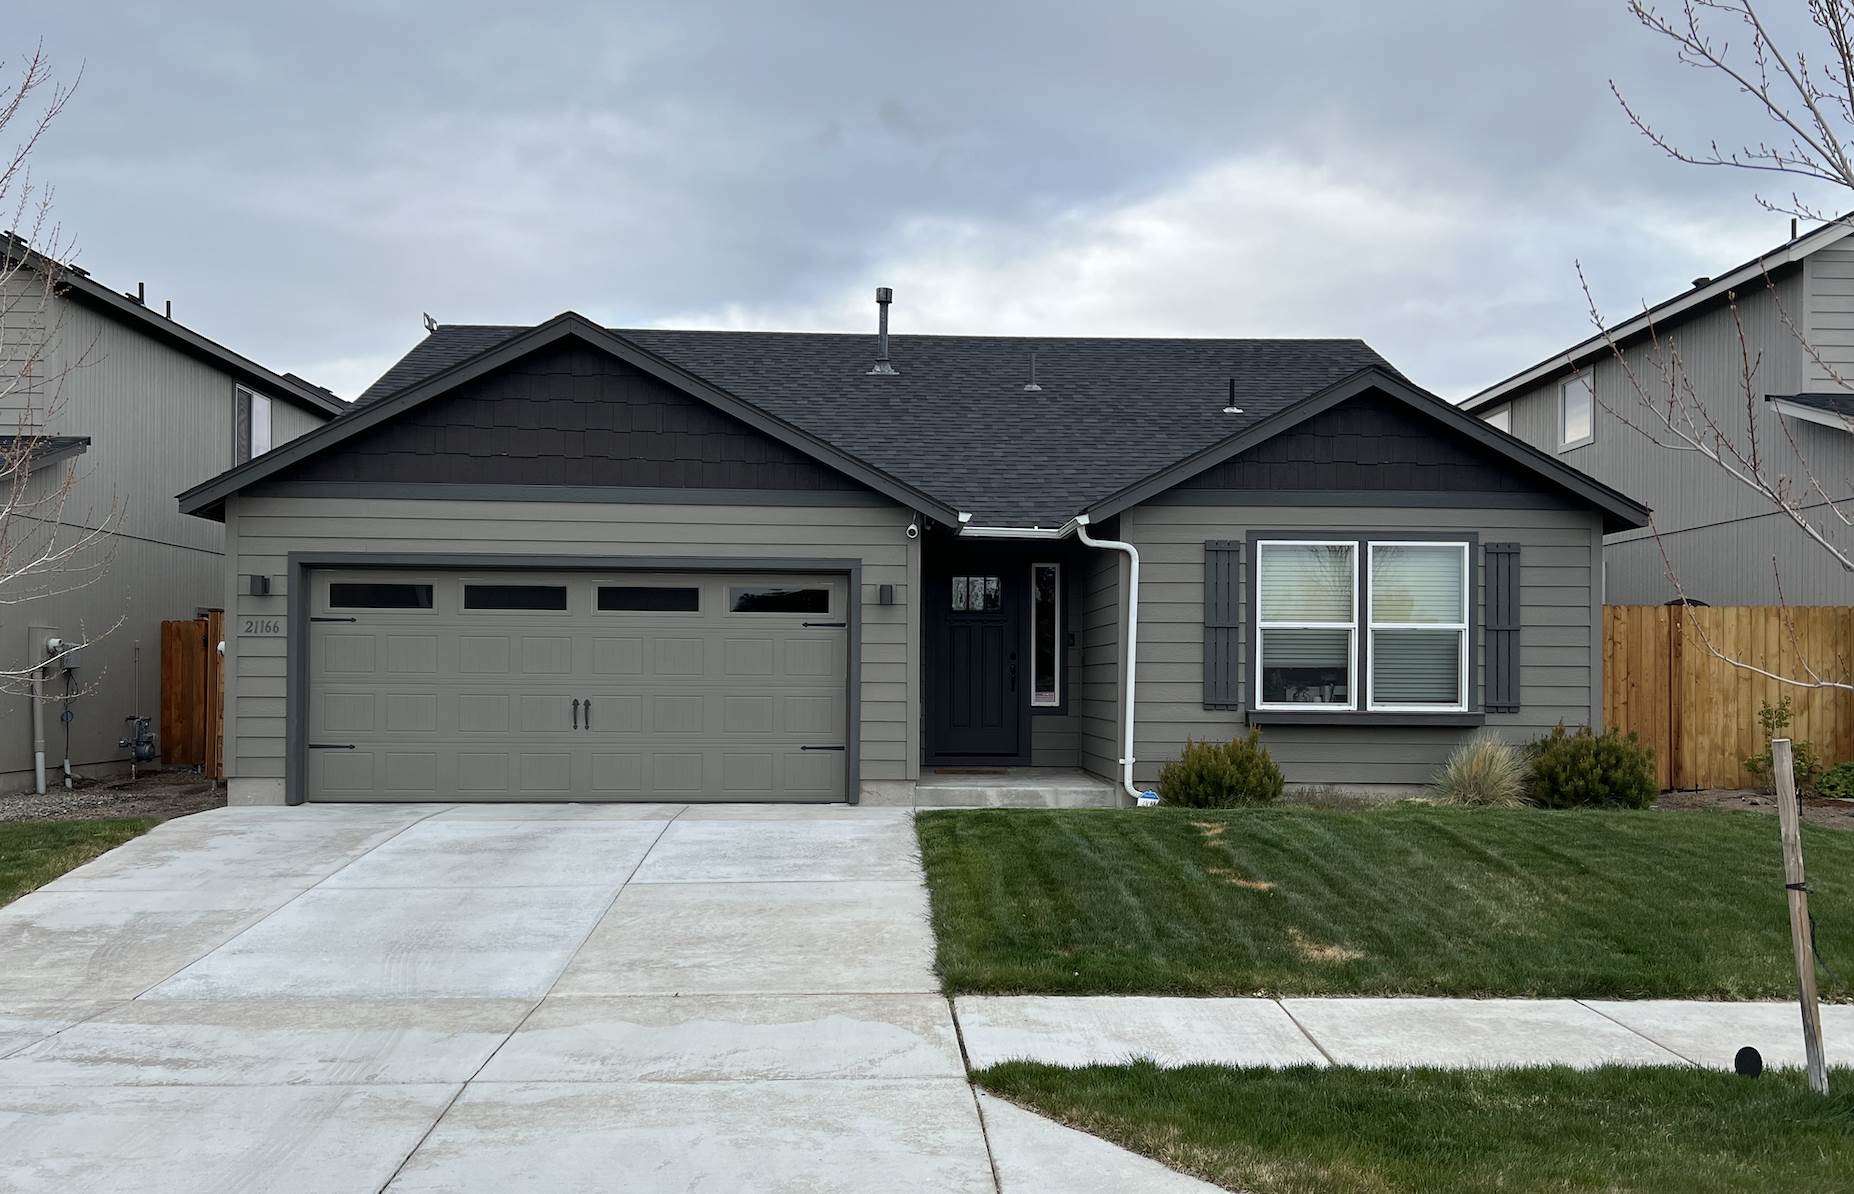 21166 Darnel, Bend, OR 97702